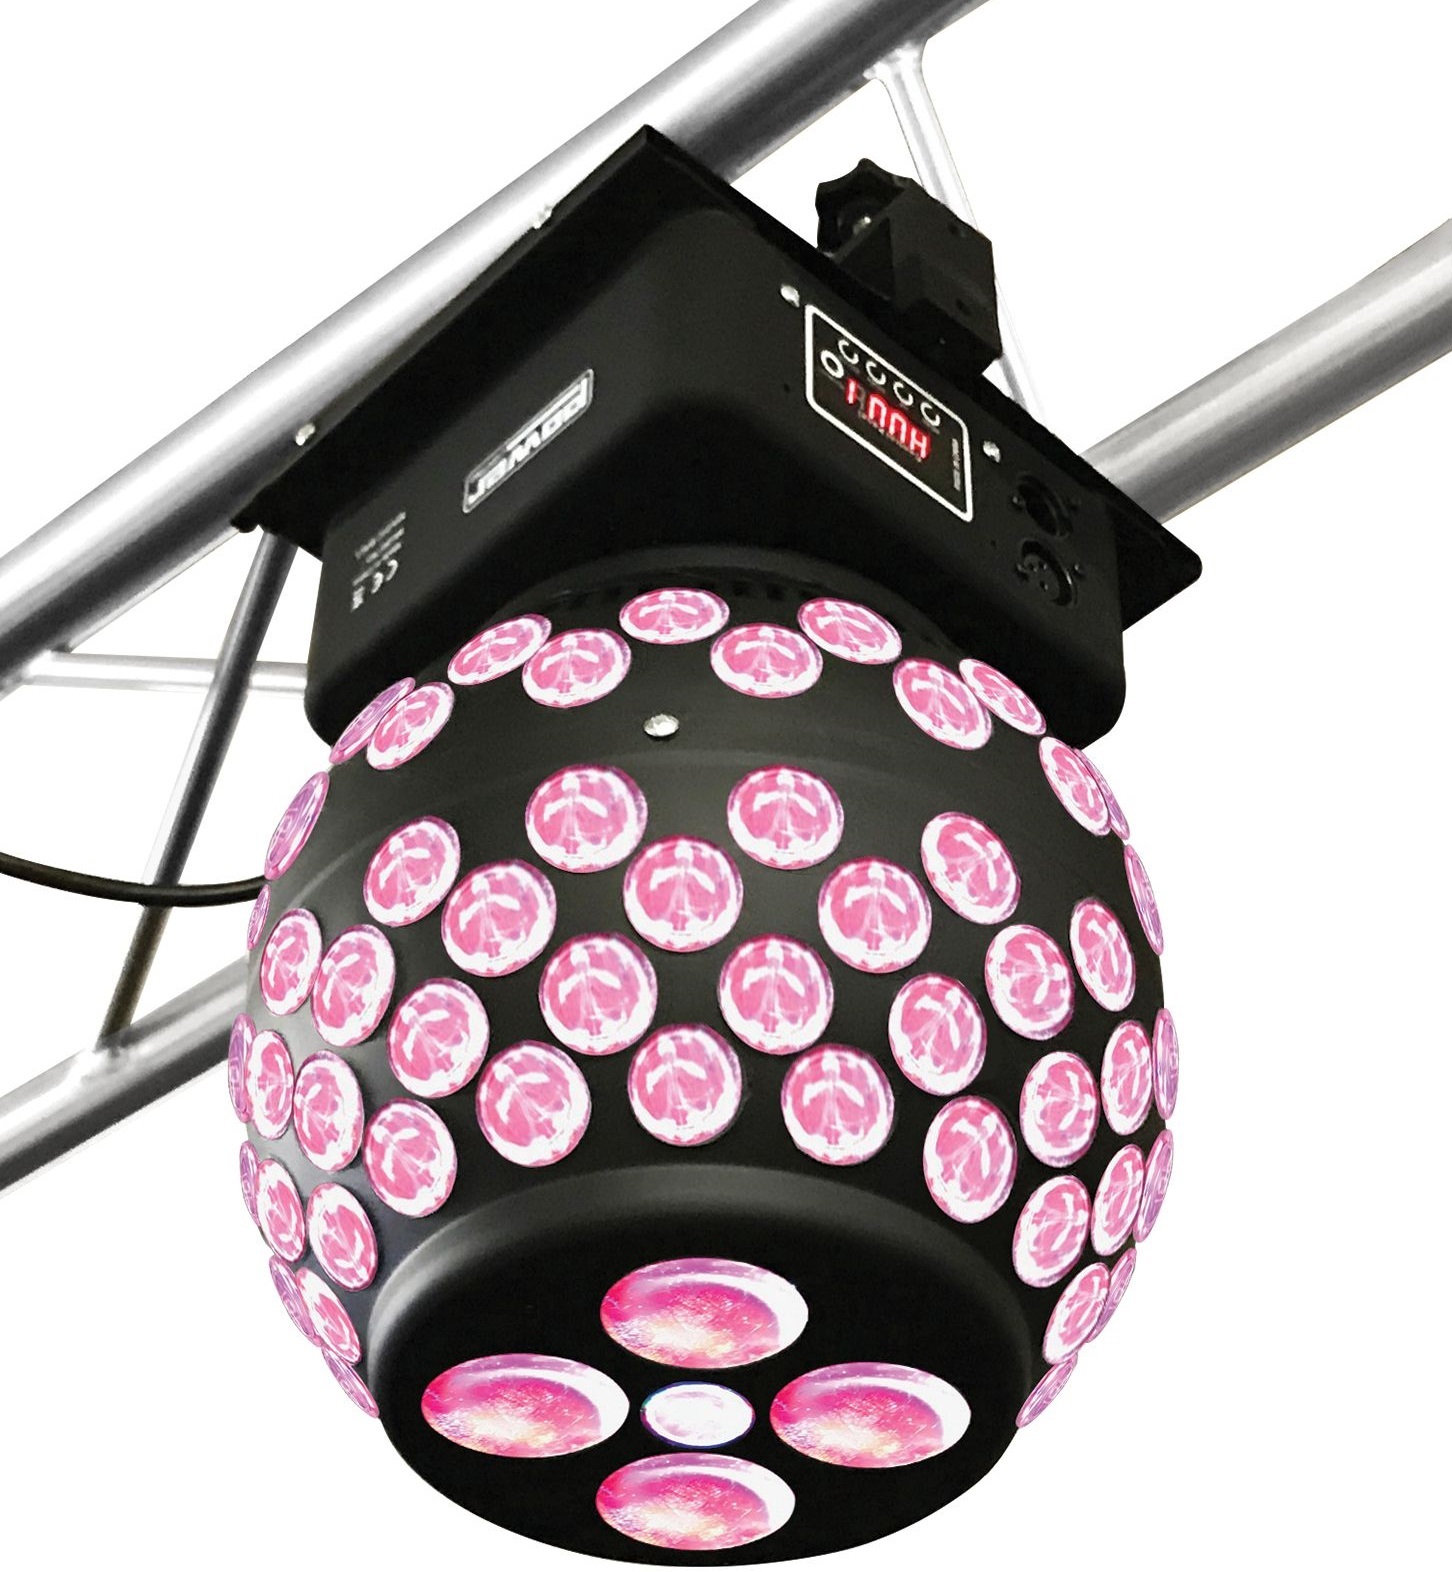 Power Lighting Magic Ball - Derby / cameo - Main picture